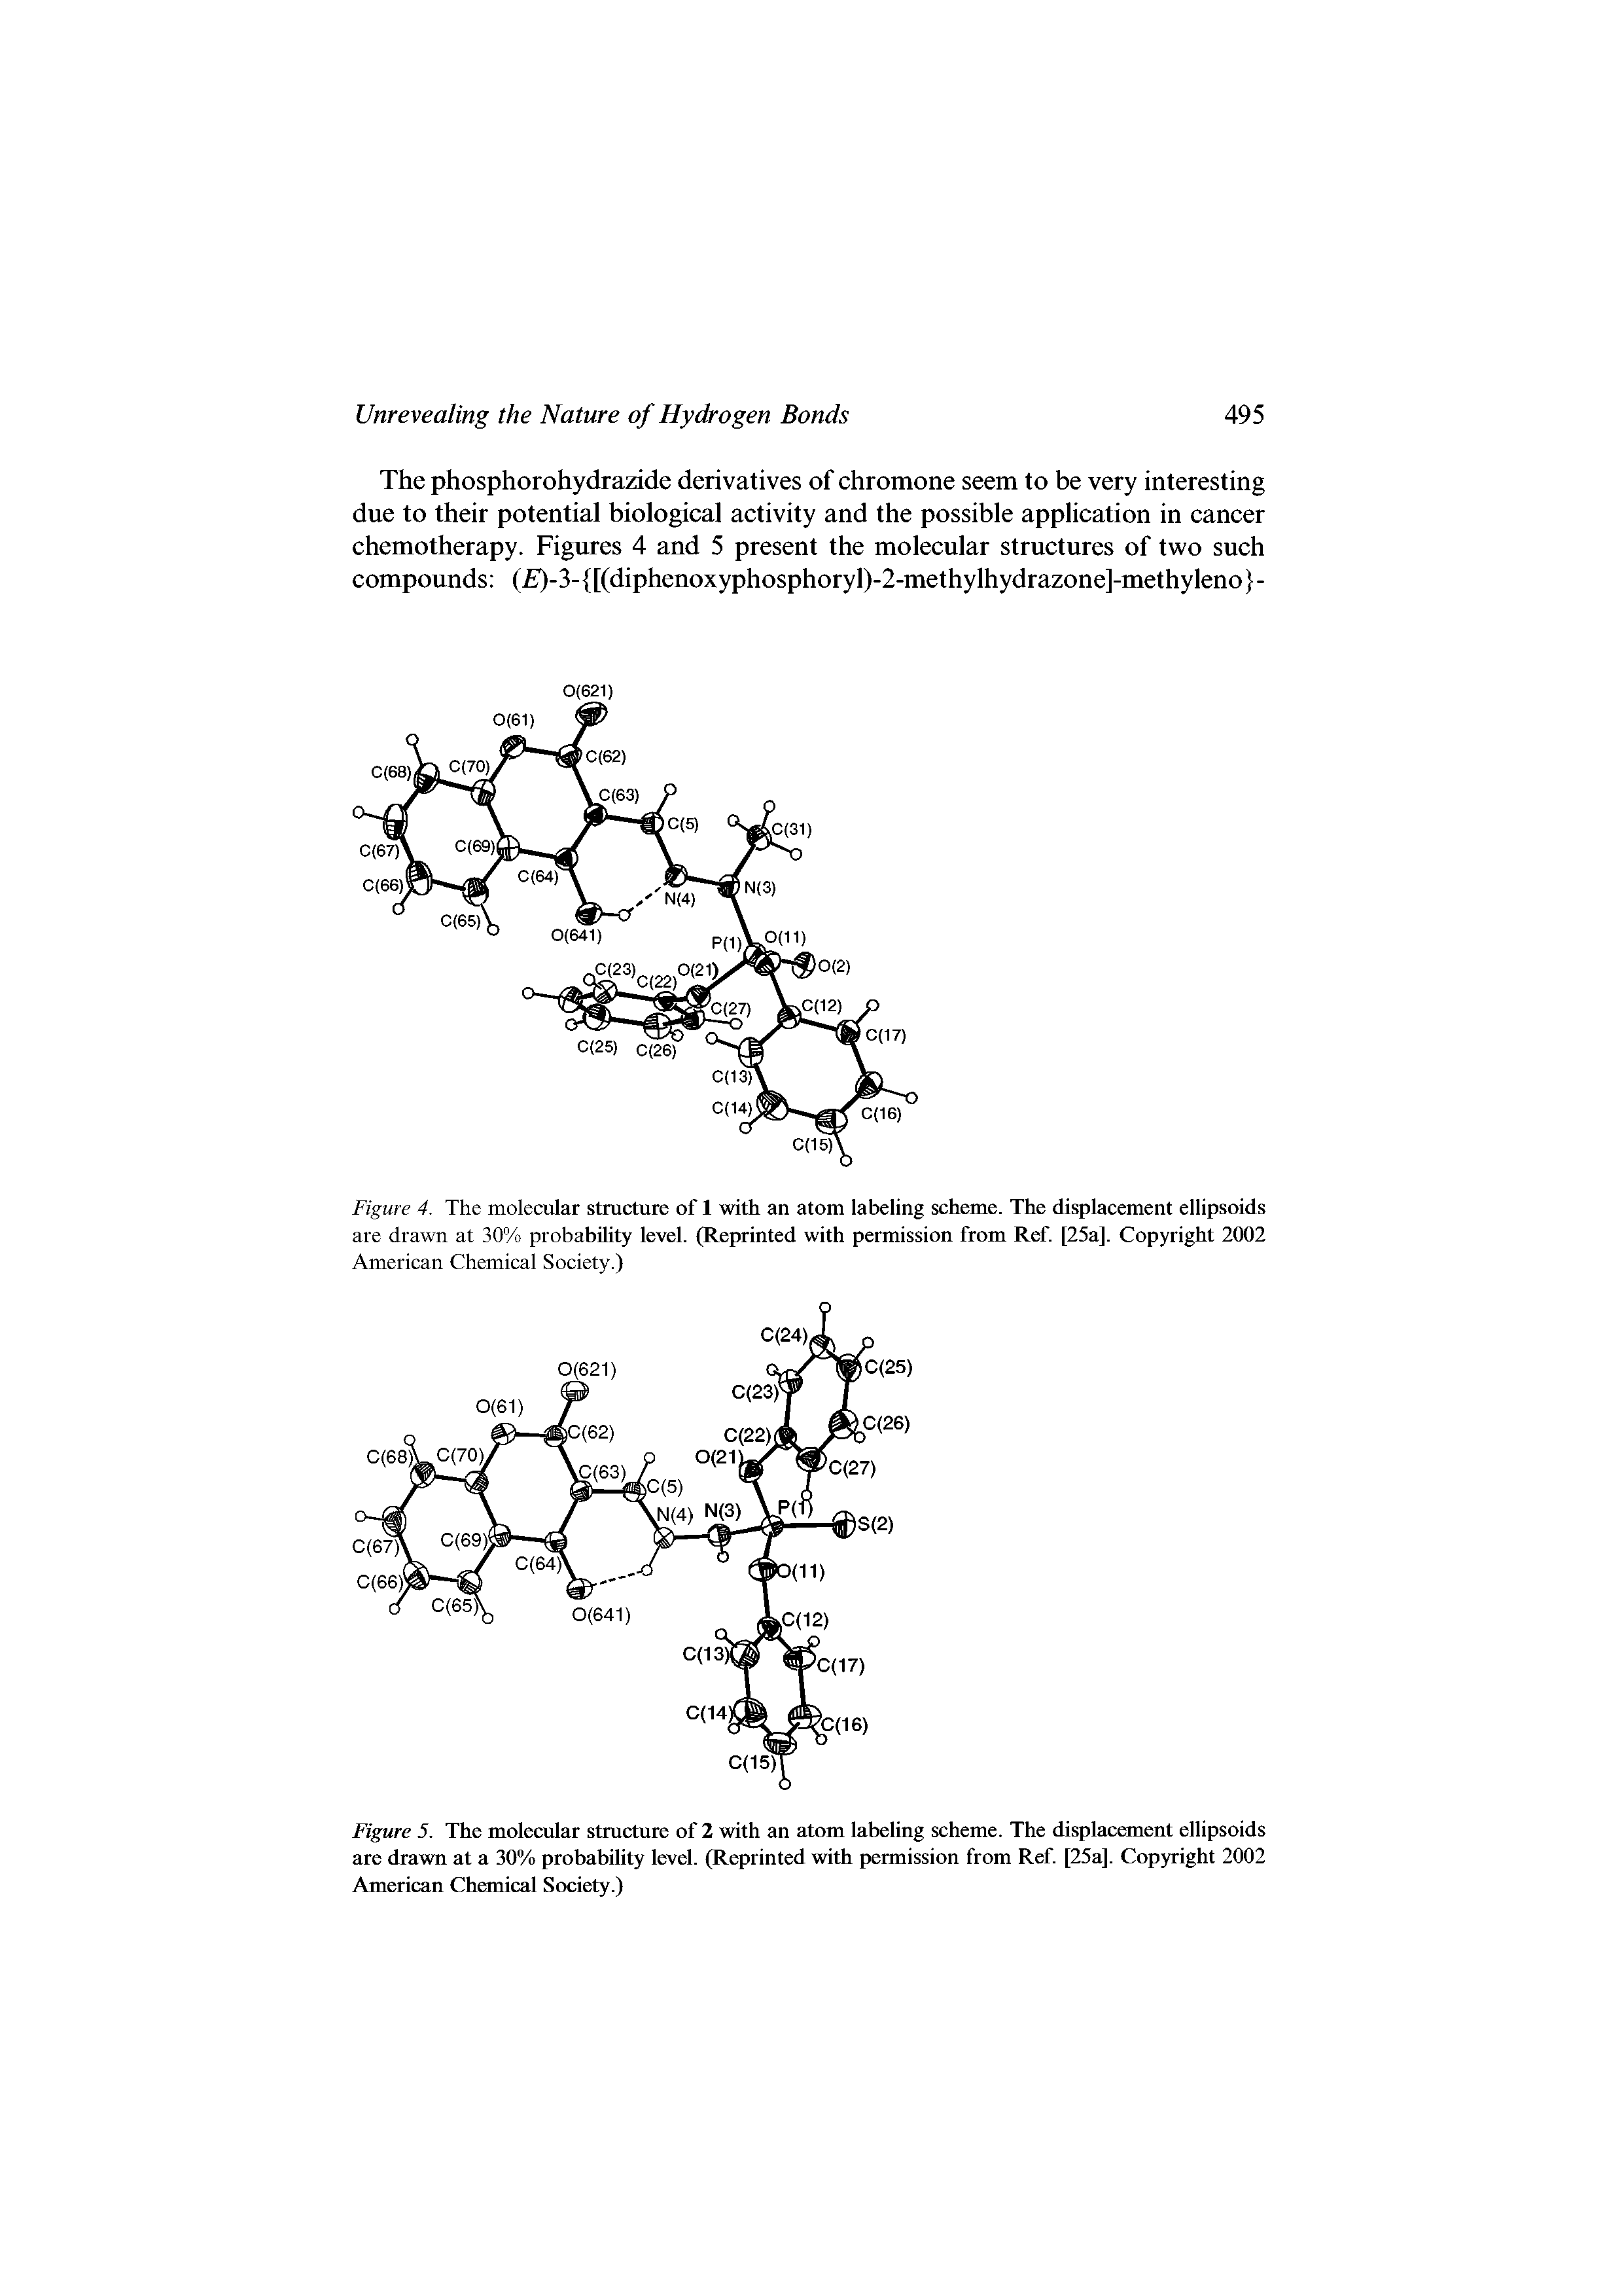 Figure 4. The molecular structure of 1 with an atom labeling scheme. The displacement ellipsoids are drawn at 30% probability level. (Reprinted with permission from Ref [25a]. Copyright 2002 American Chemical Society.)...